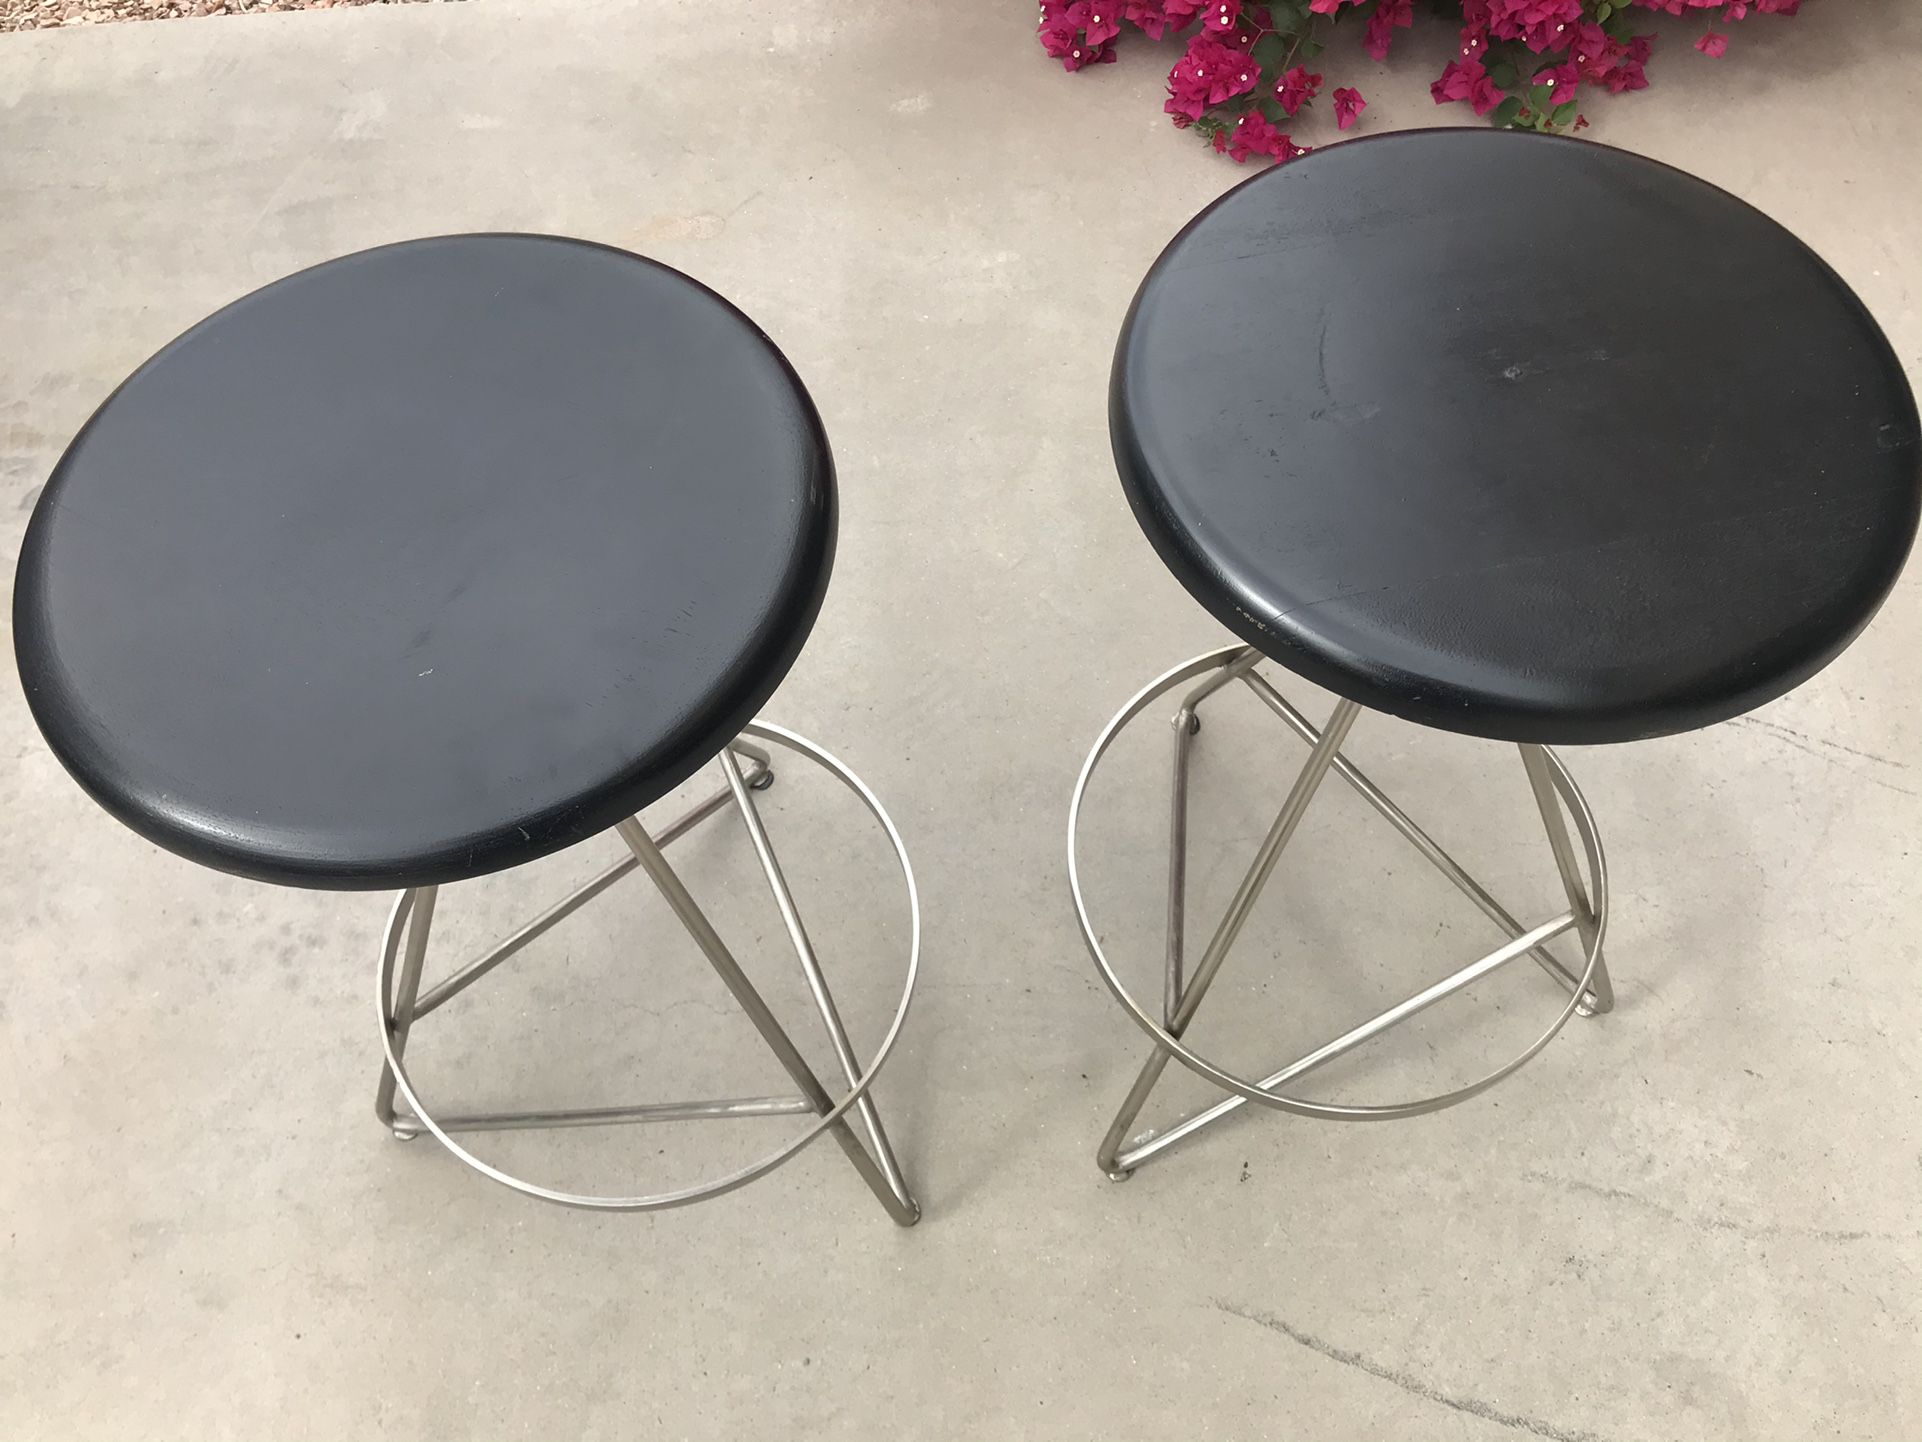 2 contemporary modern industrial stools